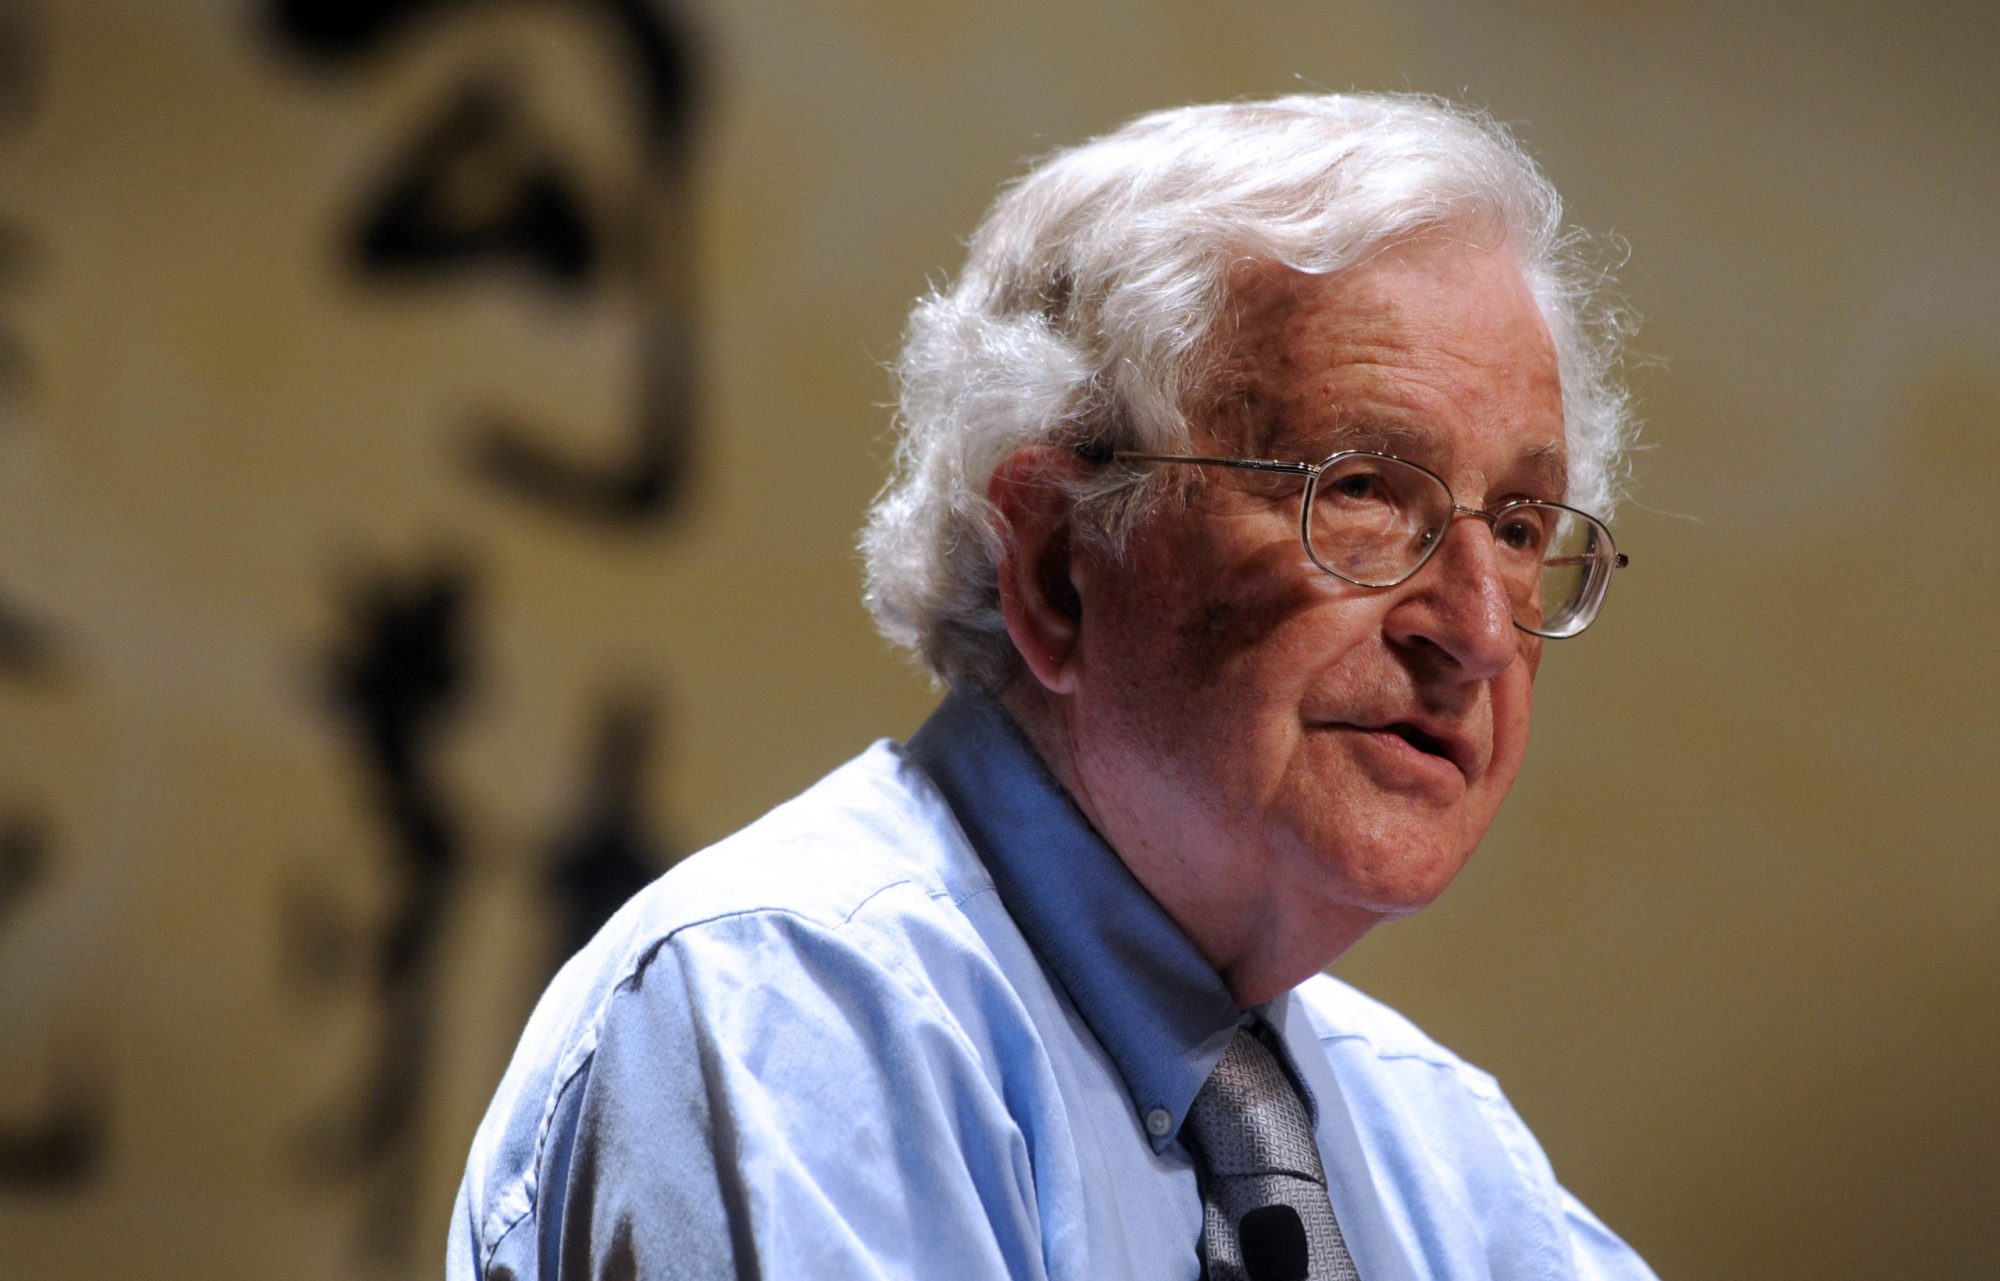 Noam Chomsky lectures during the ceremony for the Conferment of the Honorary Doctorate at Peking University on August 13, 2010 in Beijing, China.